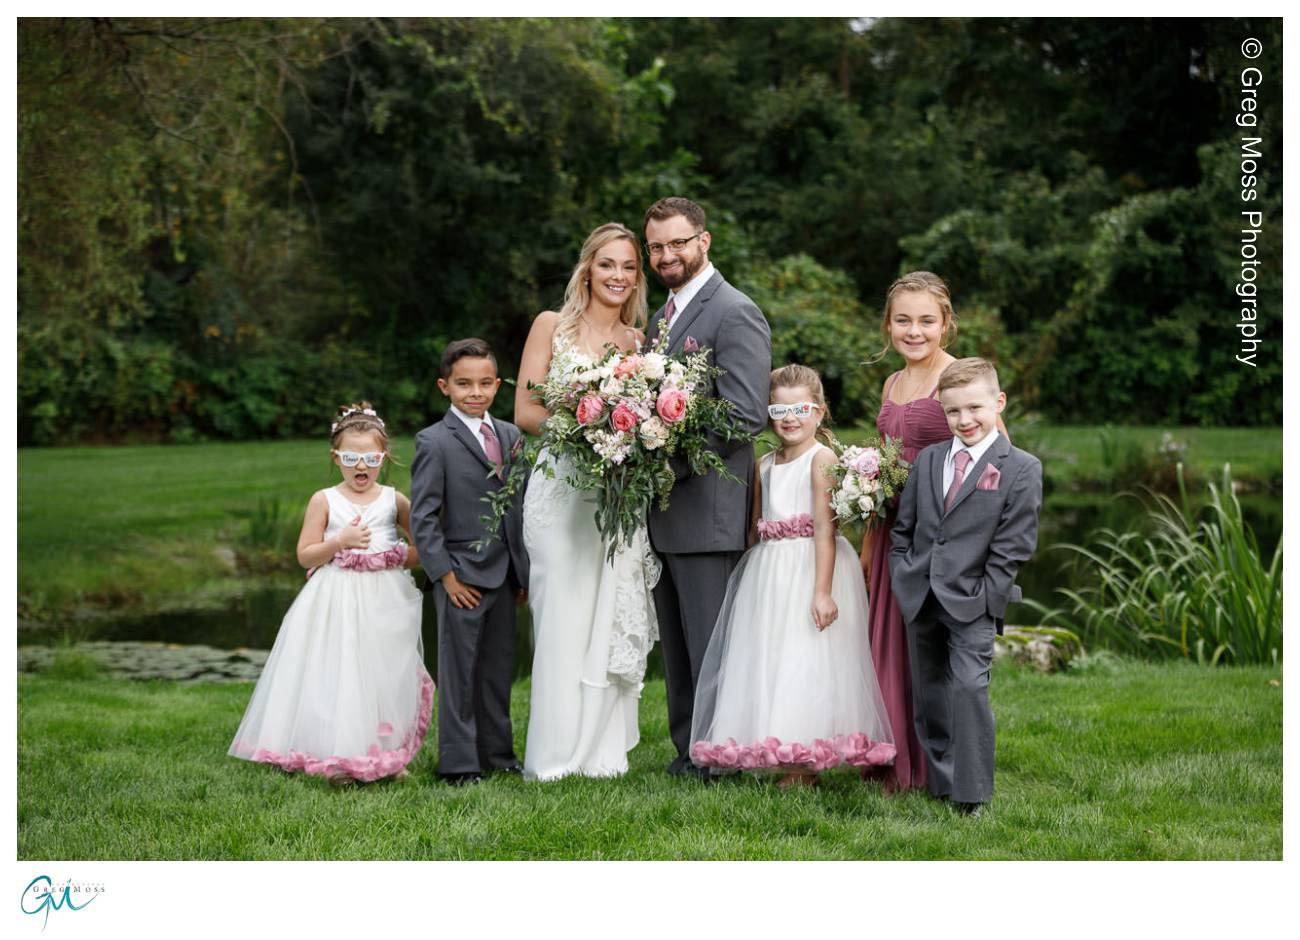 Family portrait on wedding day with bride and groom and their 5 kids